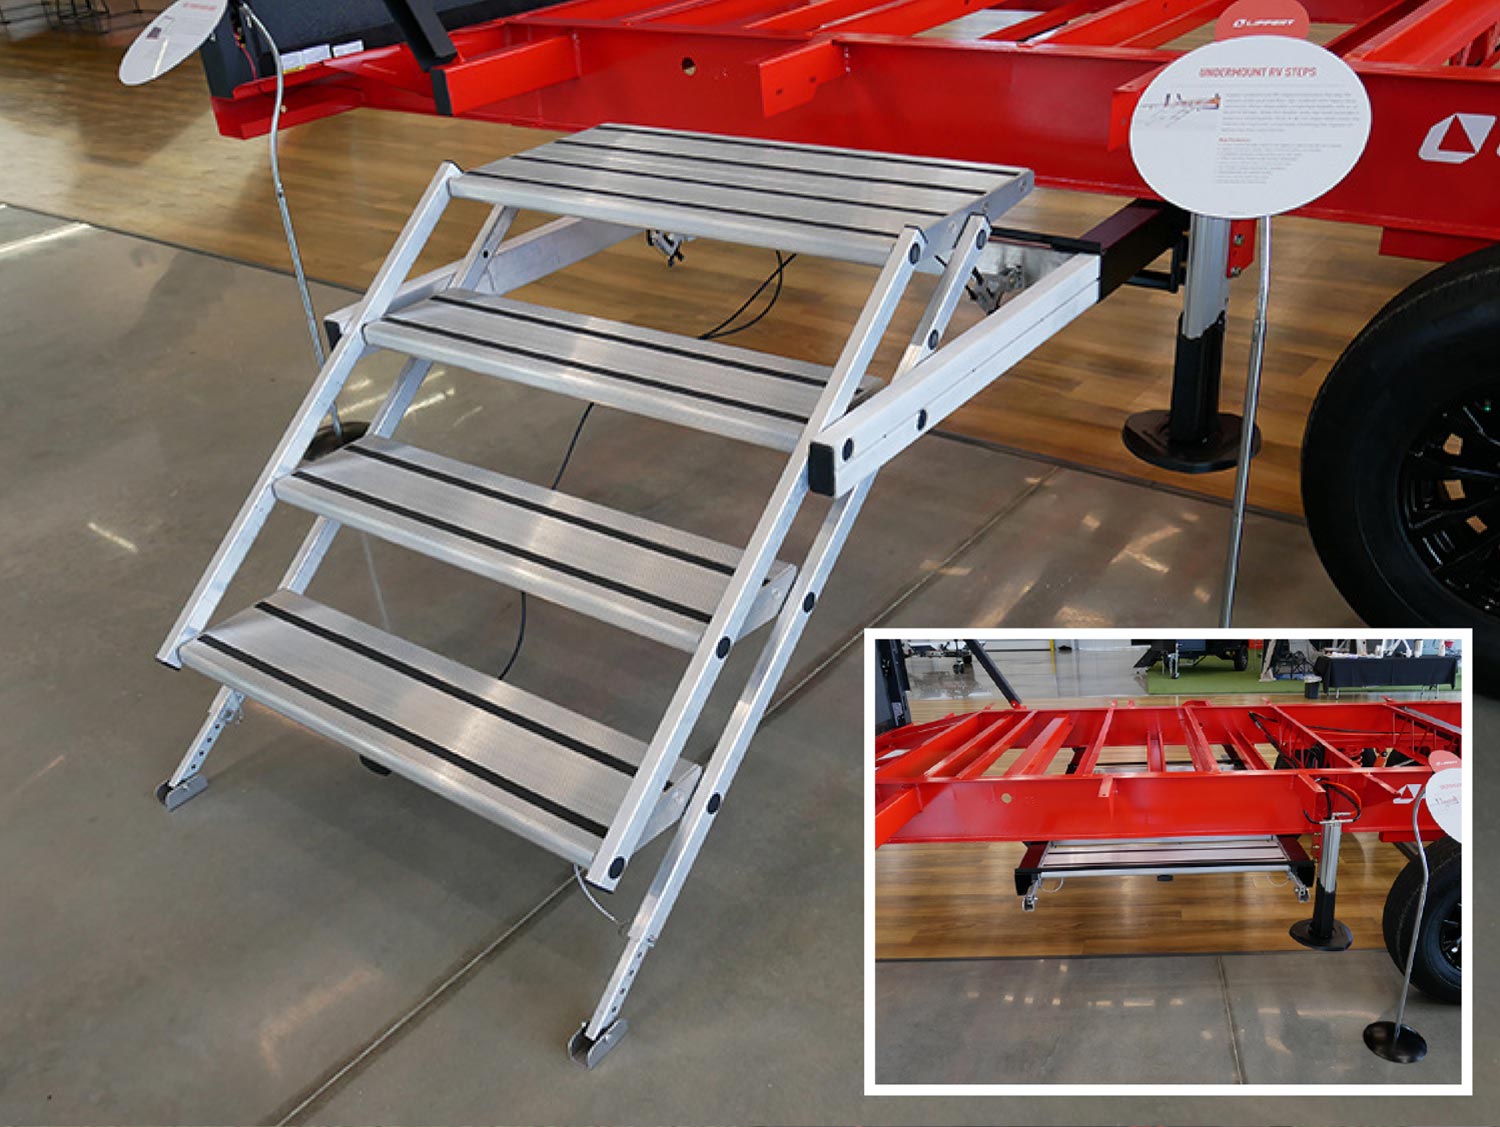 3/4ths view of the Lippert SolidStep attached to a bright red chassis; second smaller image of the Lippert SolidStep folded flat beneath the bright red chassis